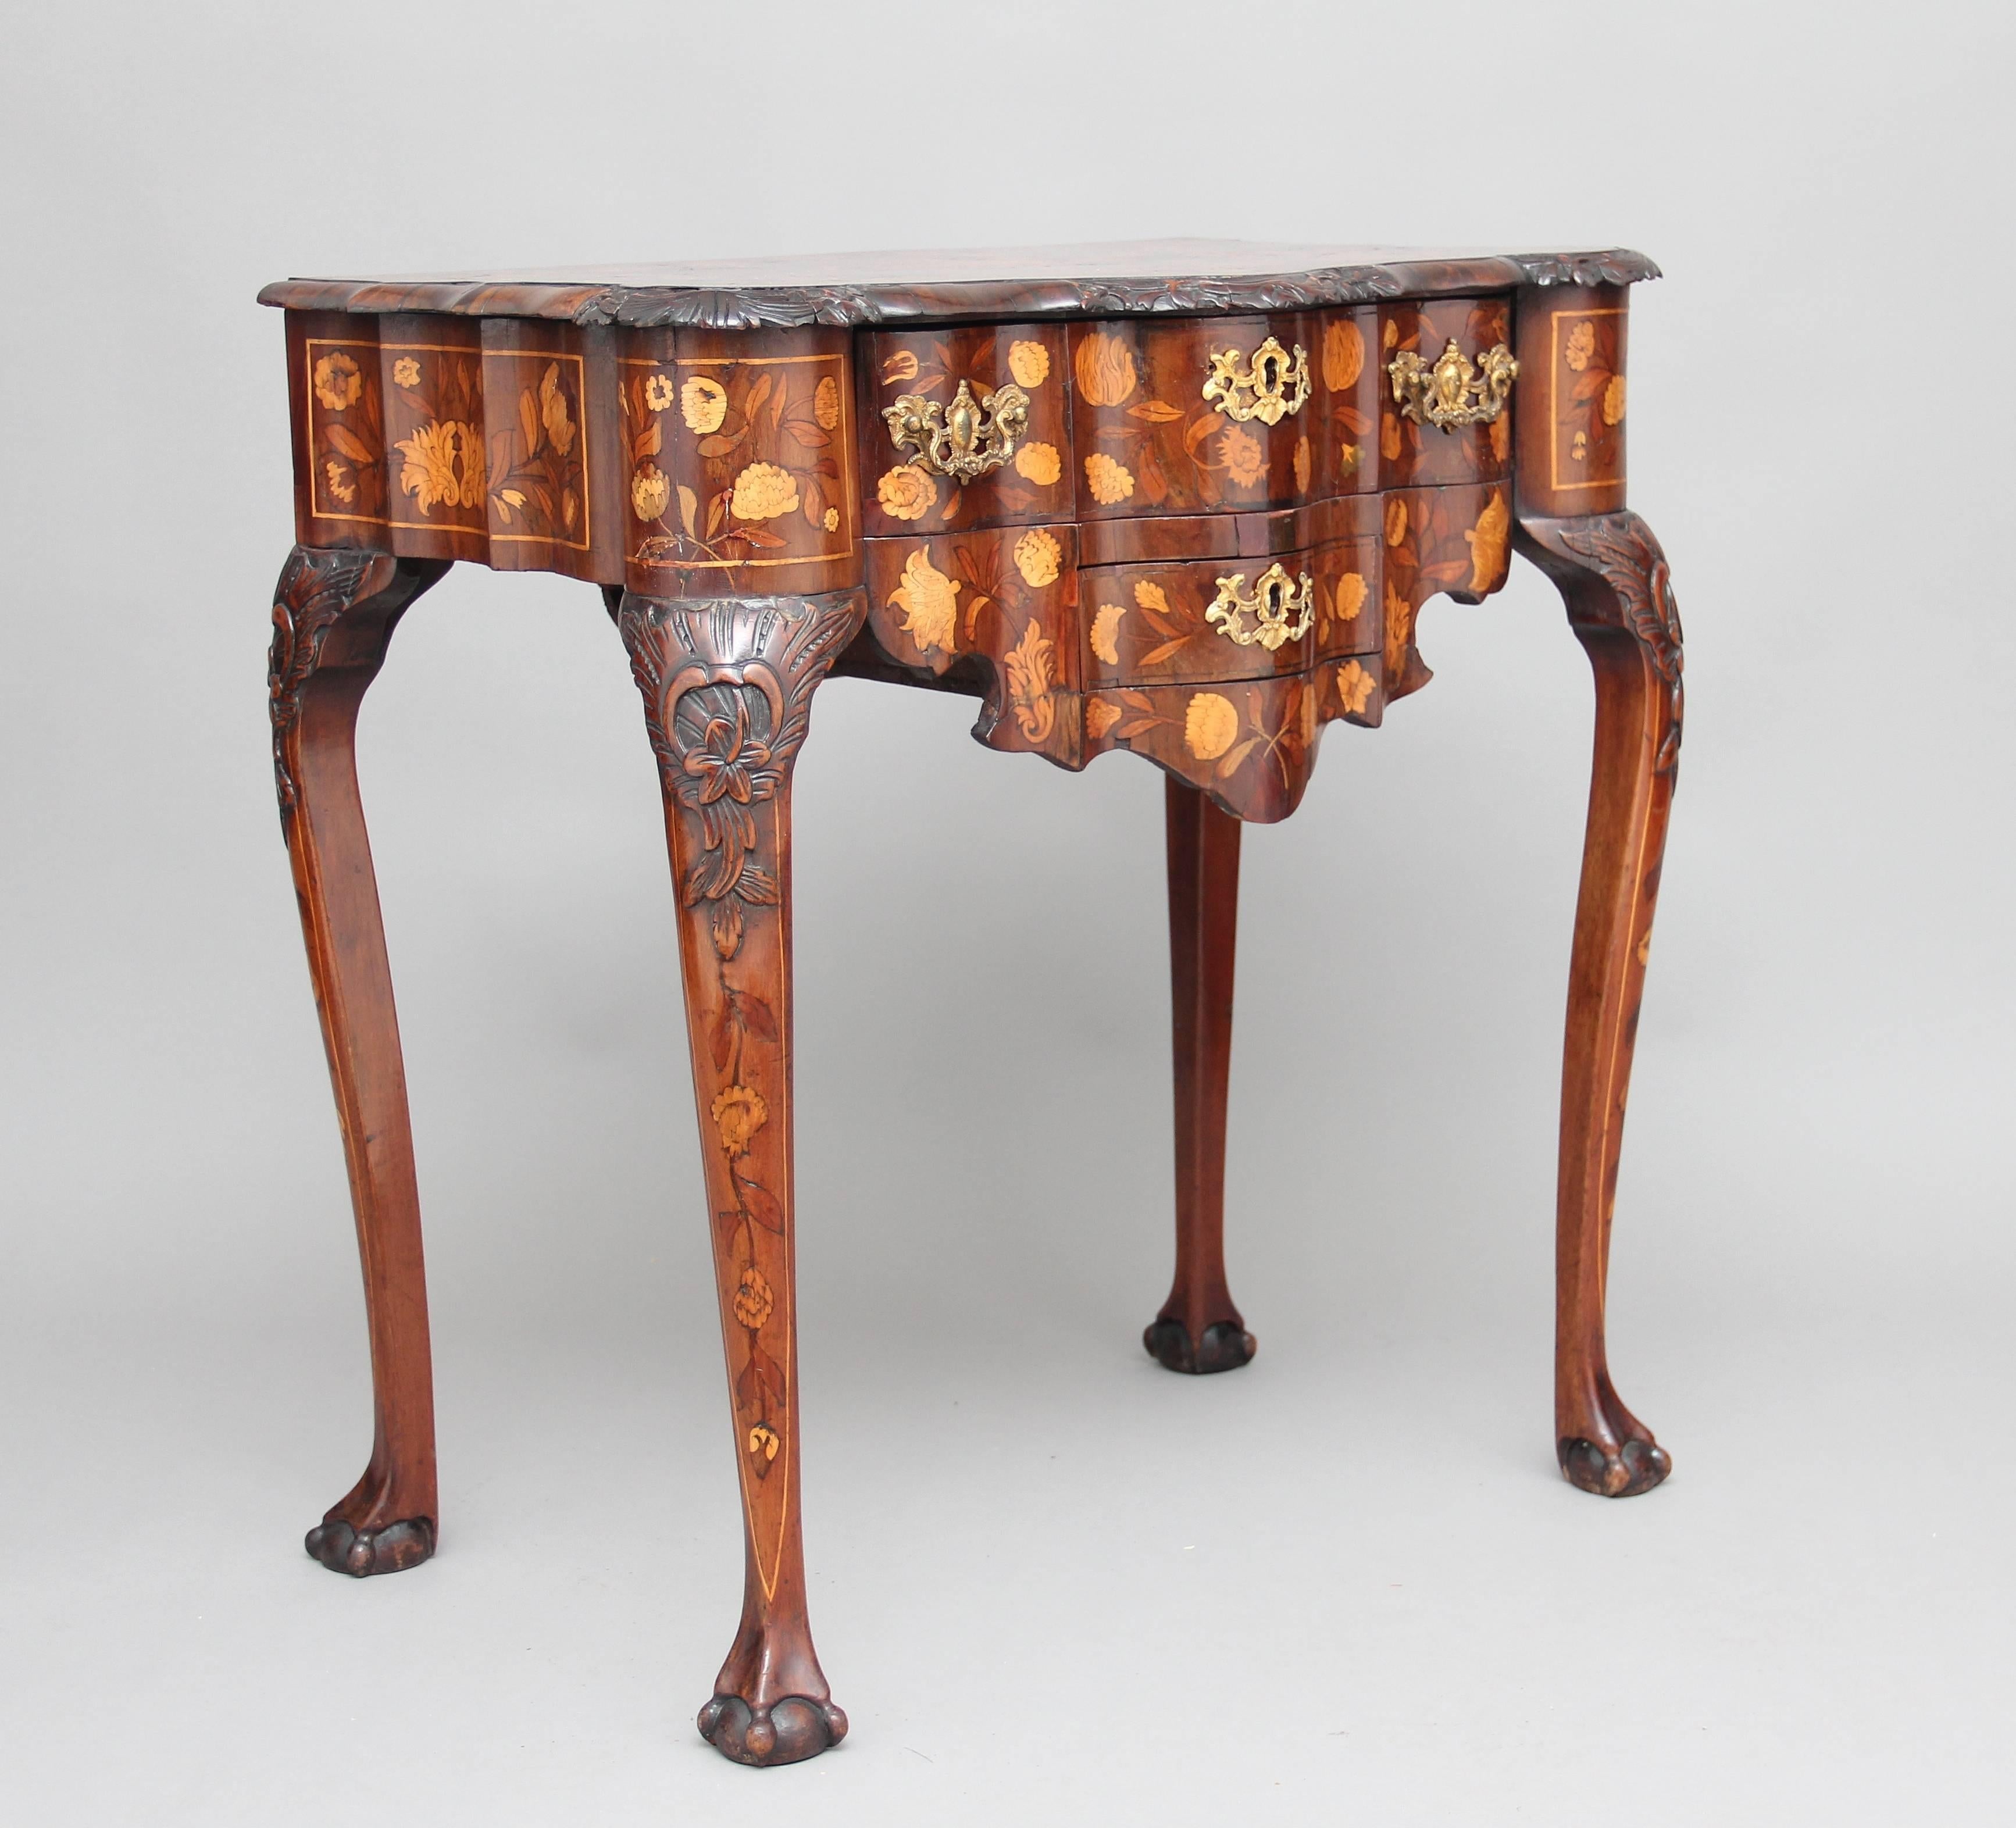 A lovely quality 18th Century walnut Dutch marquetry lowboy / side table, the shaped top profusely inlaid with various birds and floral decoration, with a carved and moulded edge above two oak lined drawers with original brass handles, serpentine